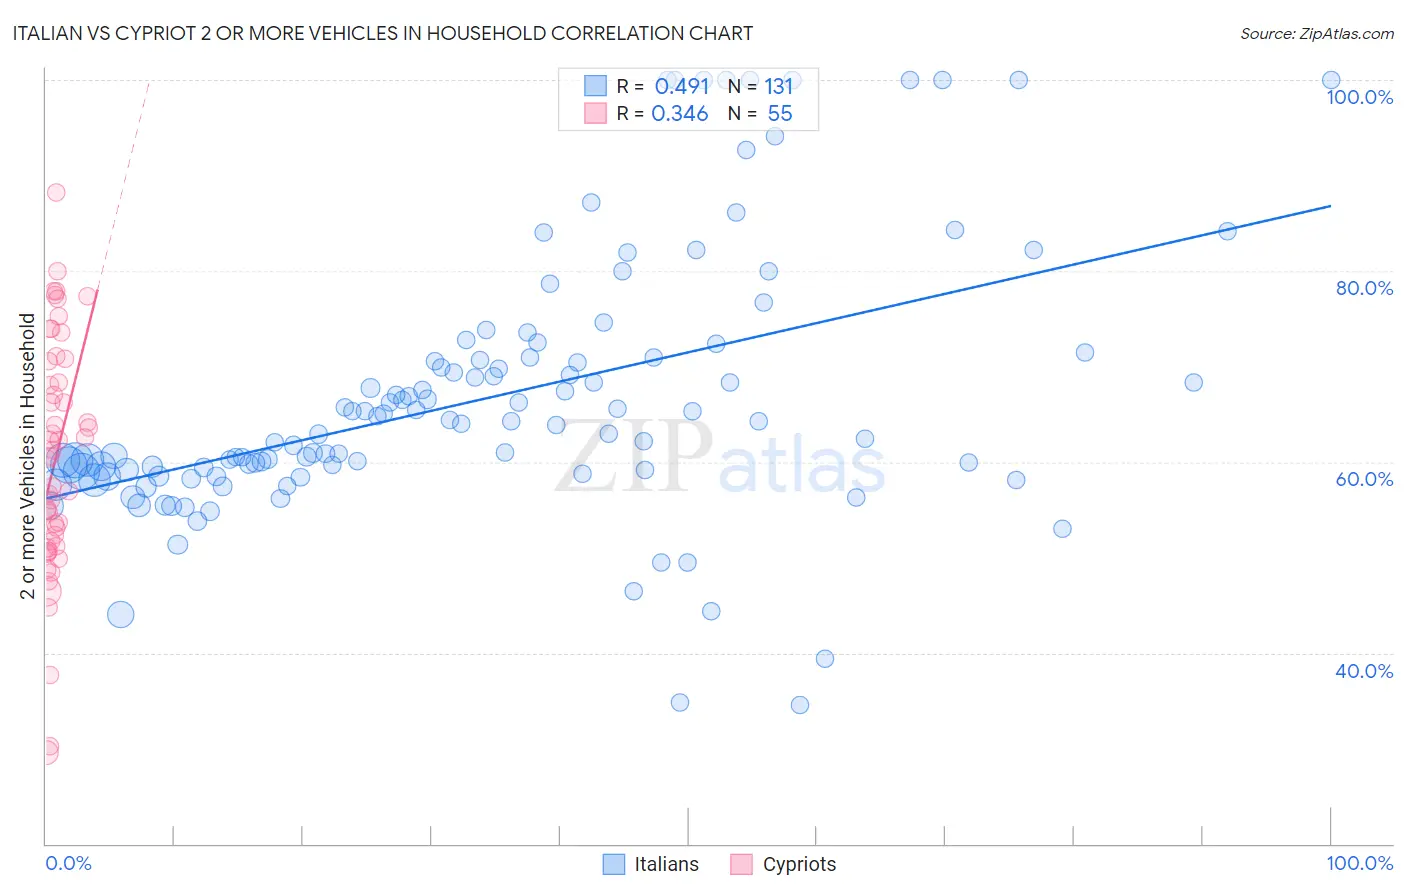 Italian vs Cypriot 2 or more Vehicles in Household